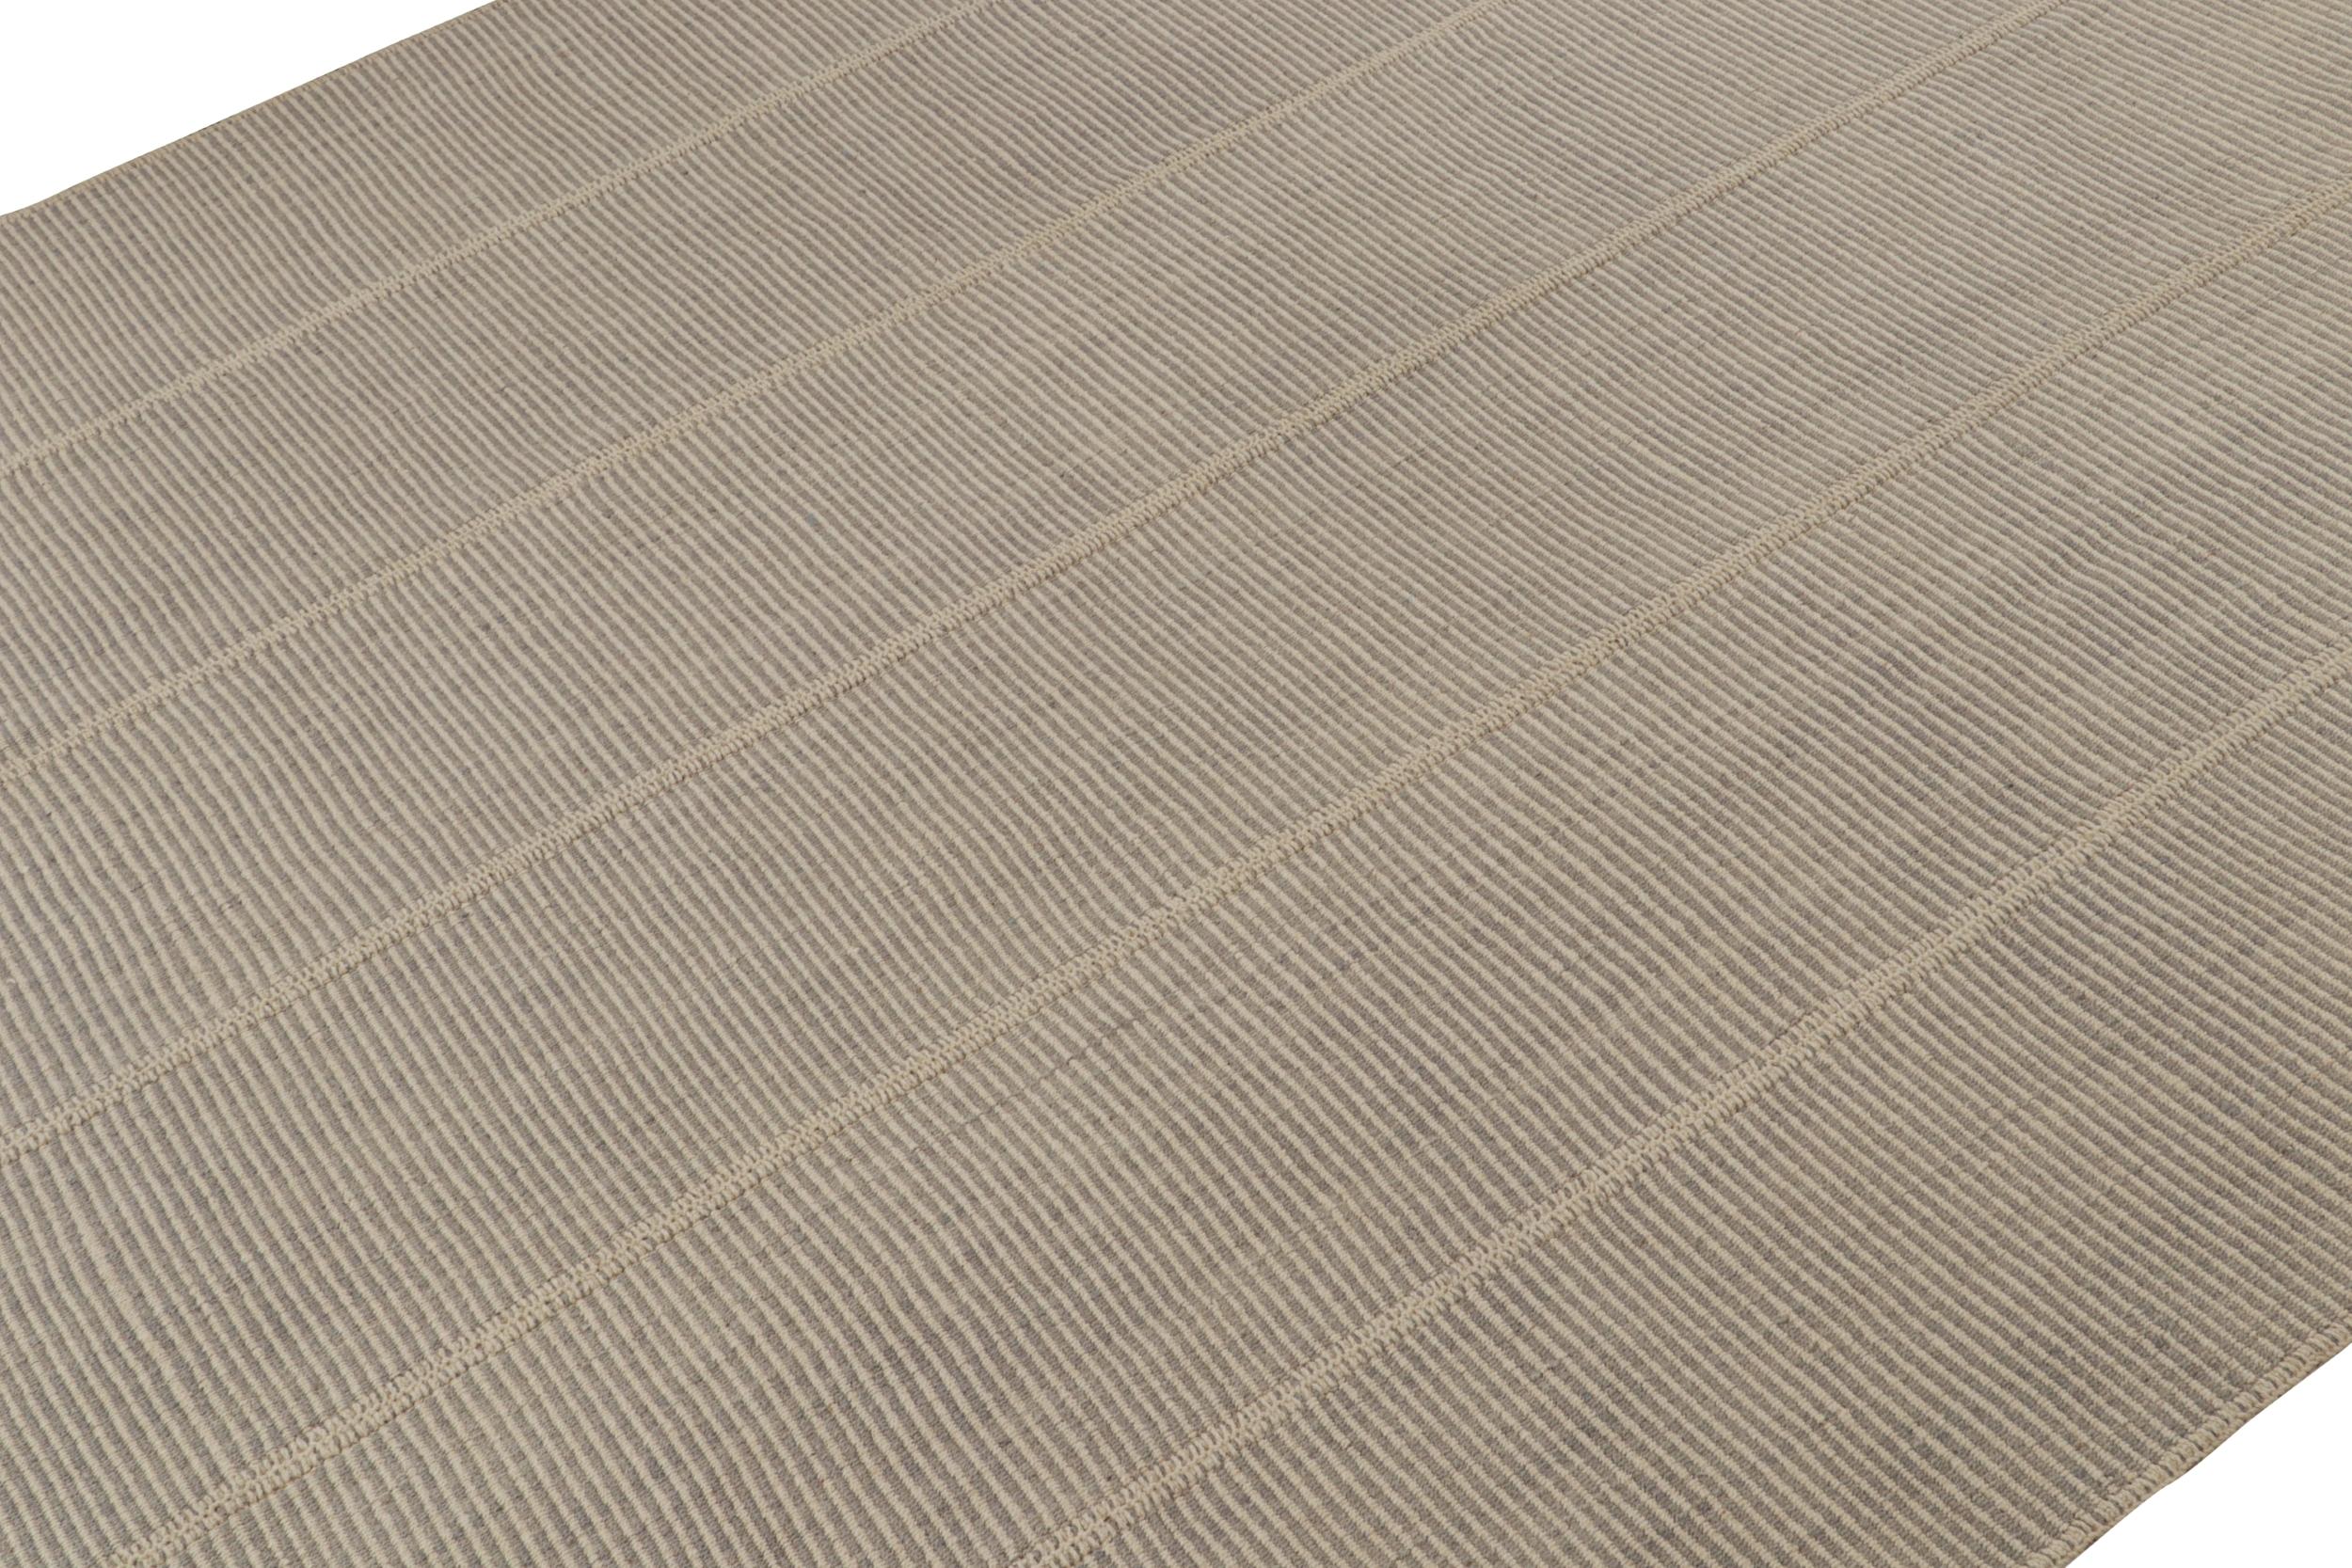 Handwoven in wool, a 10x14 Kilim from a bold new line of contemporary flatweaves by Rug & Kilim.

On the Design: 

Connoting a modern take on classic panel-weaving, our latest “Rez Kilim” enjoys cream & Gray tones. Keen eyes will admire how this